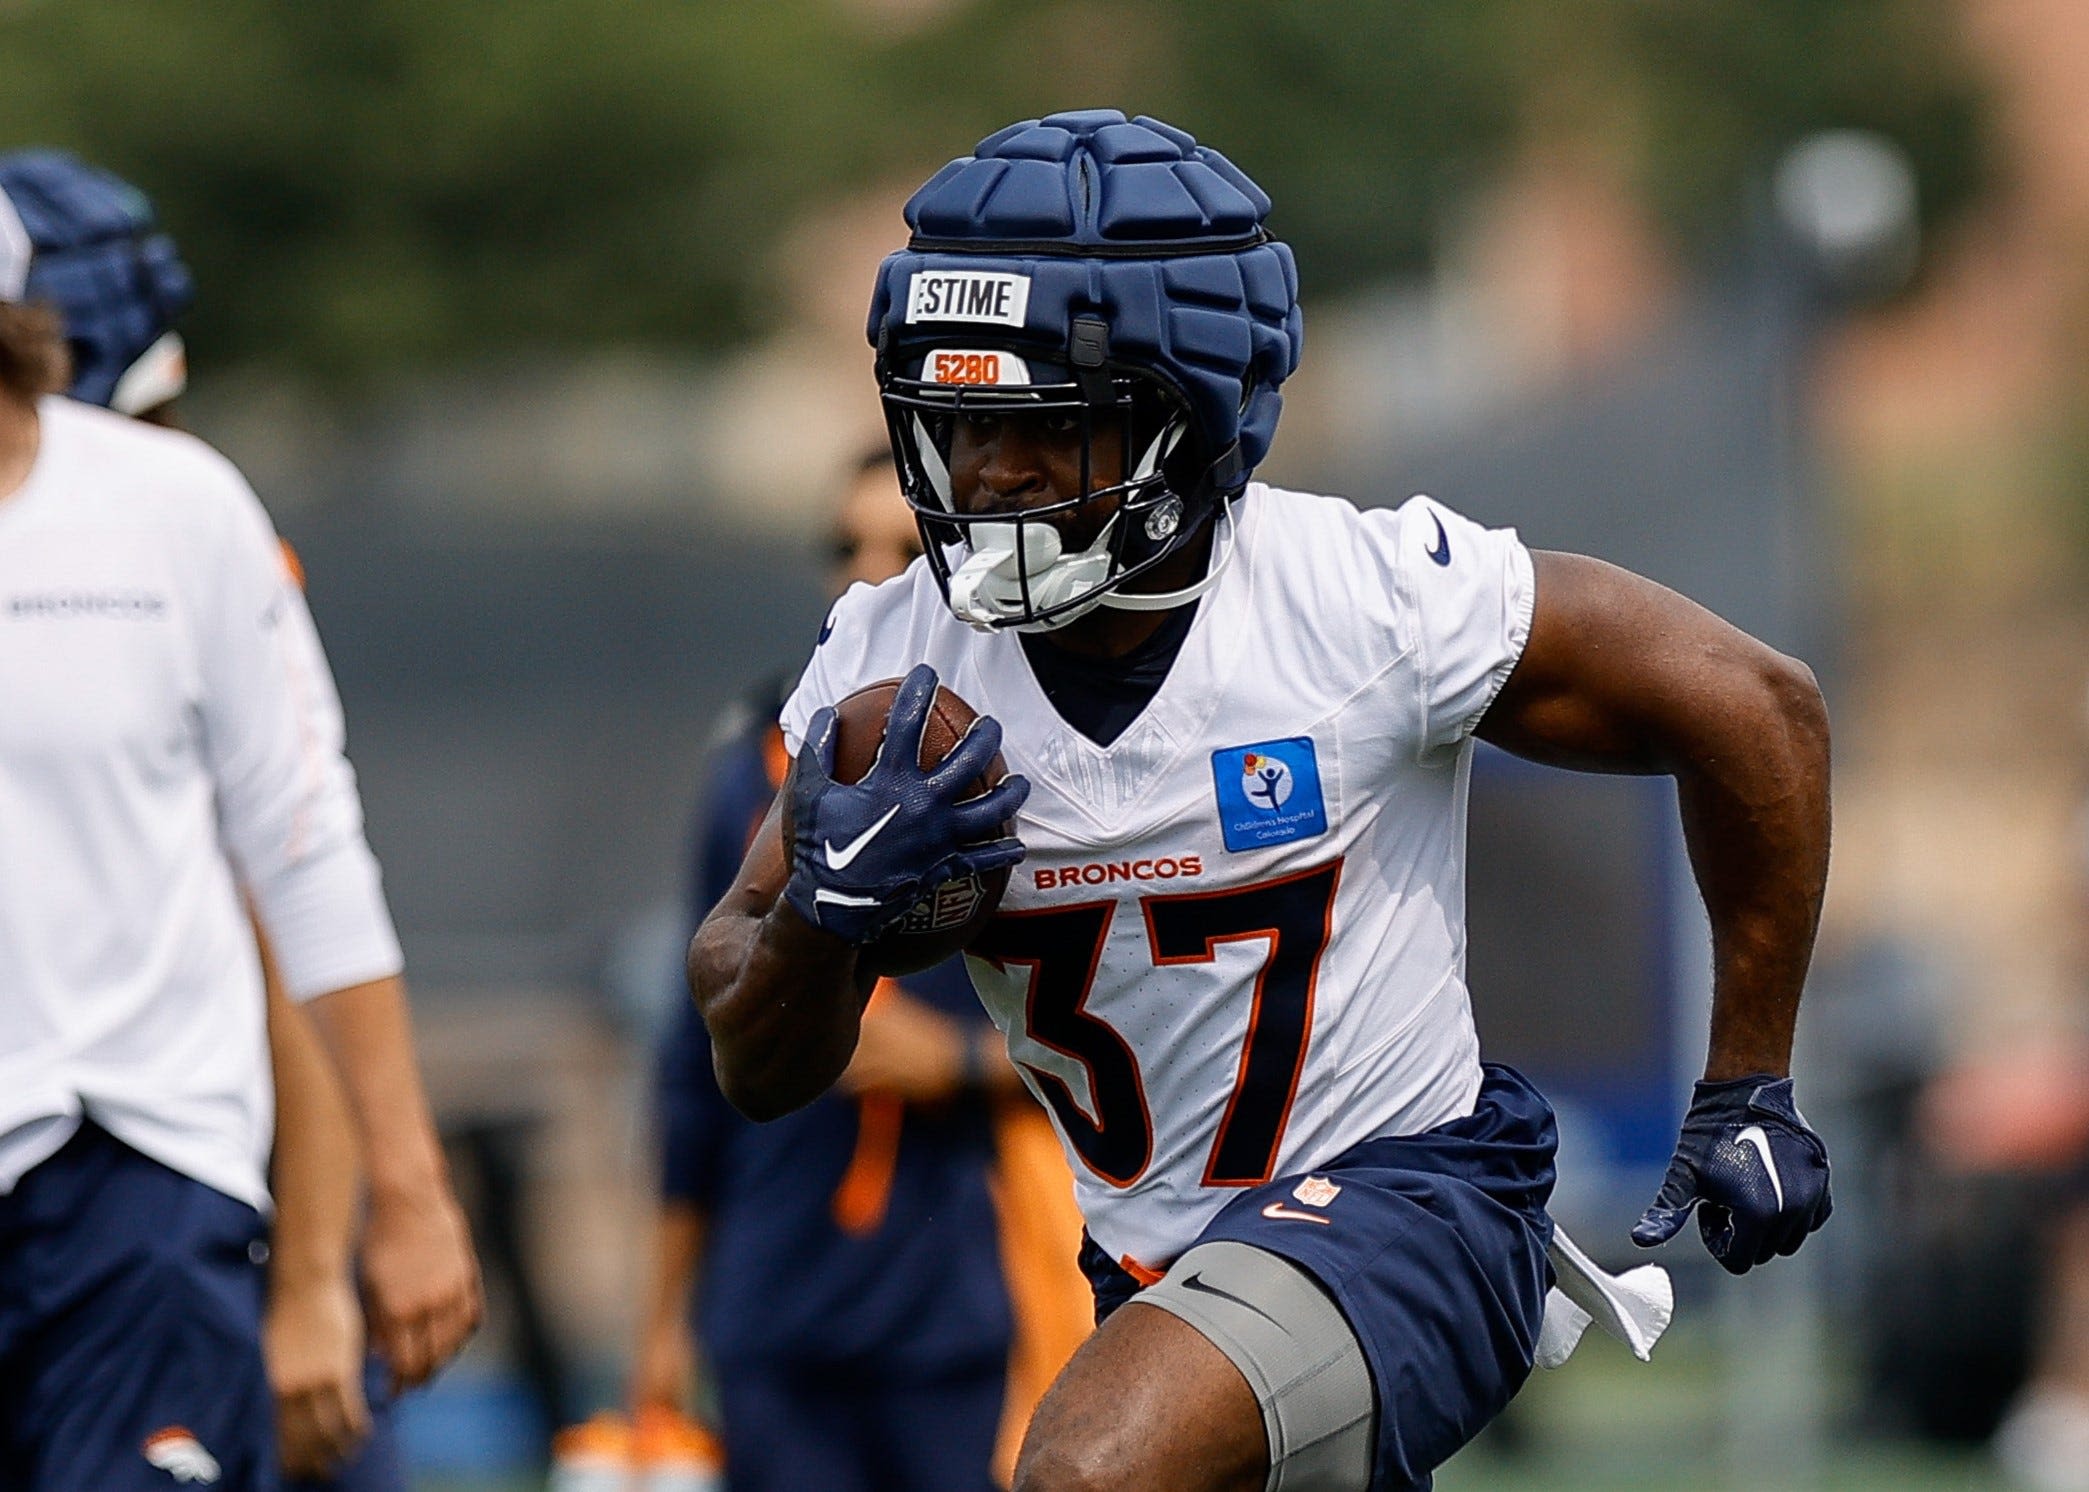 Winners and losers from the first half of Broncos training camp